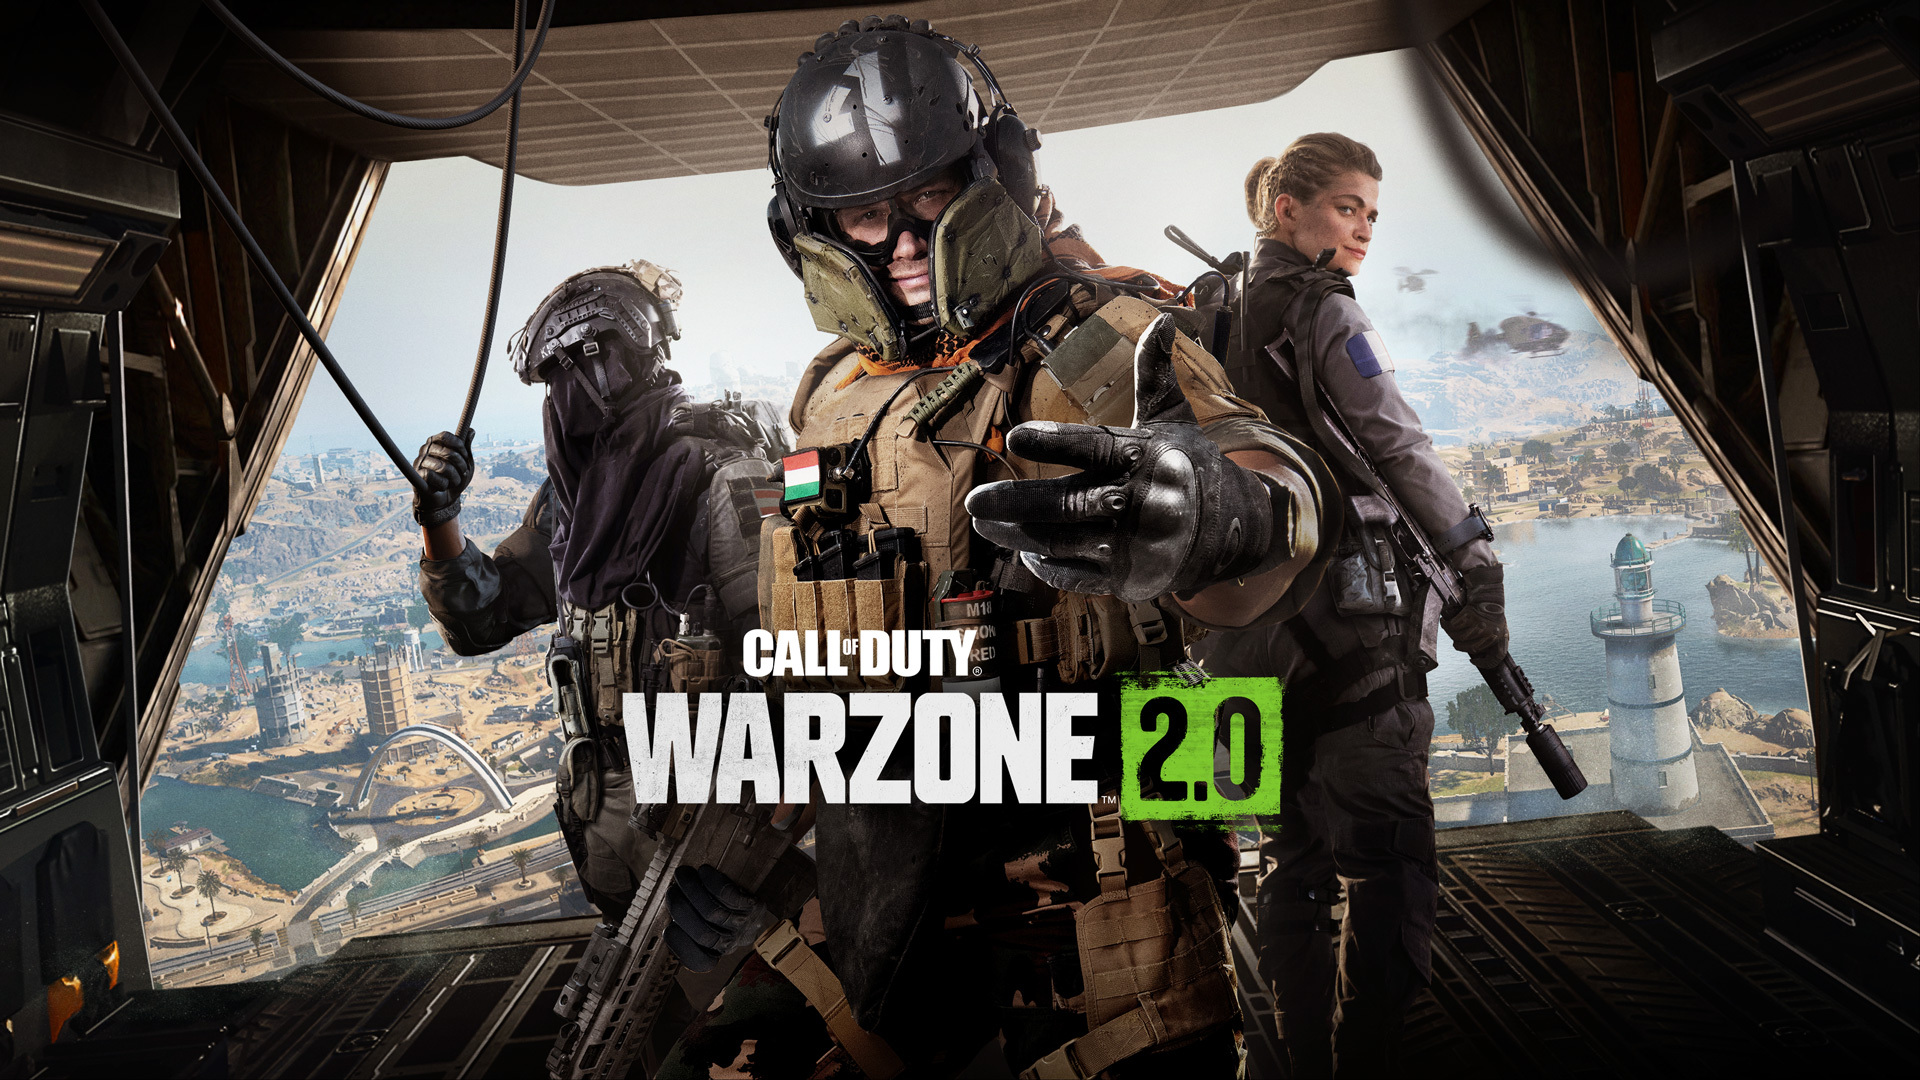 Warzone 2.0 players report bug that forces them to buy Modern Warfare II to play the game